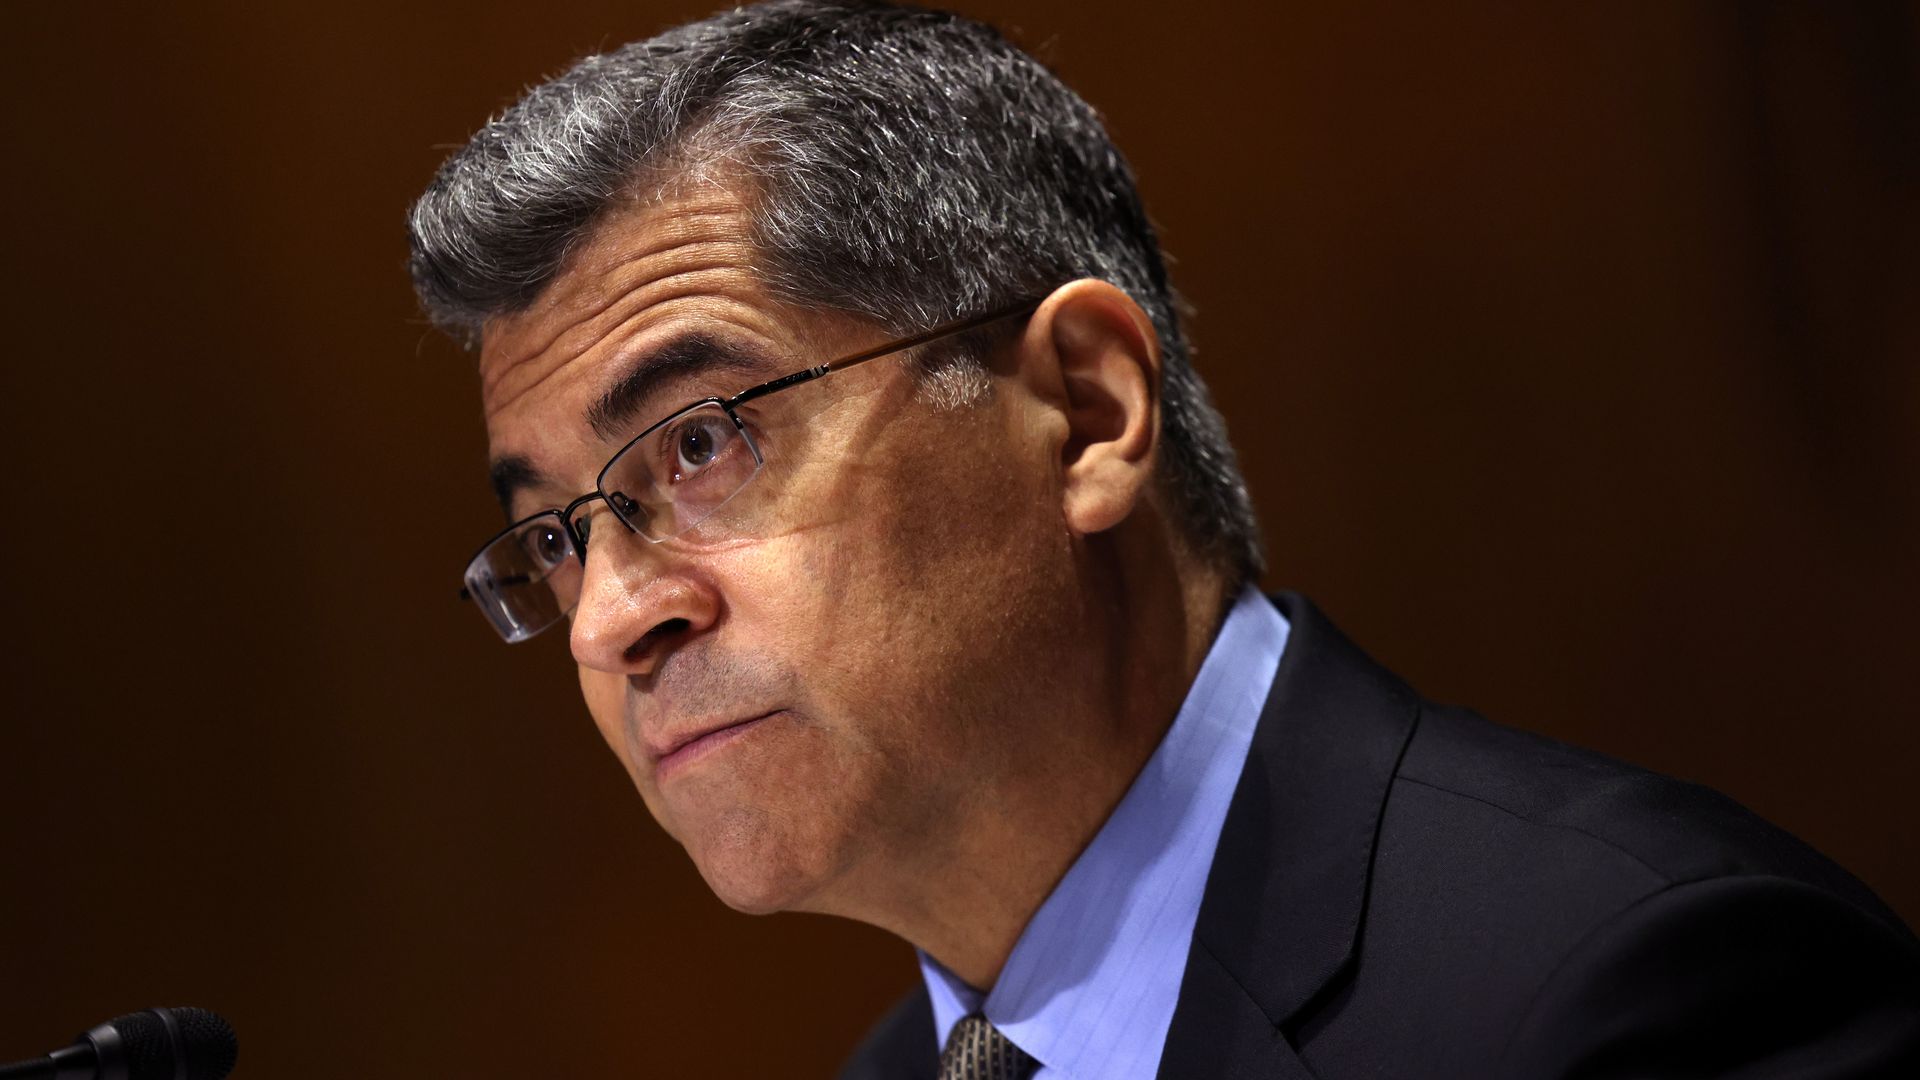 Photo of Xavier Becerra in a suit and glasses from the shoulders up